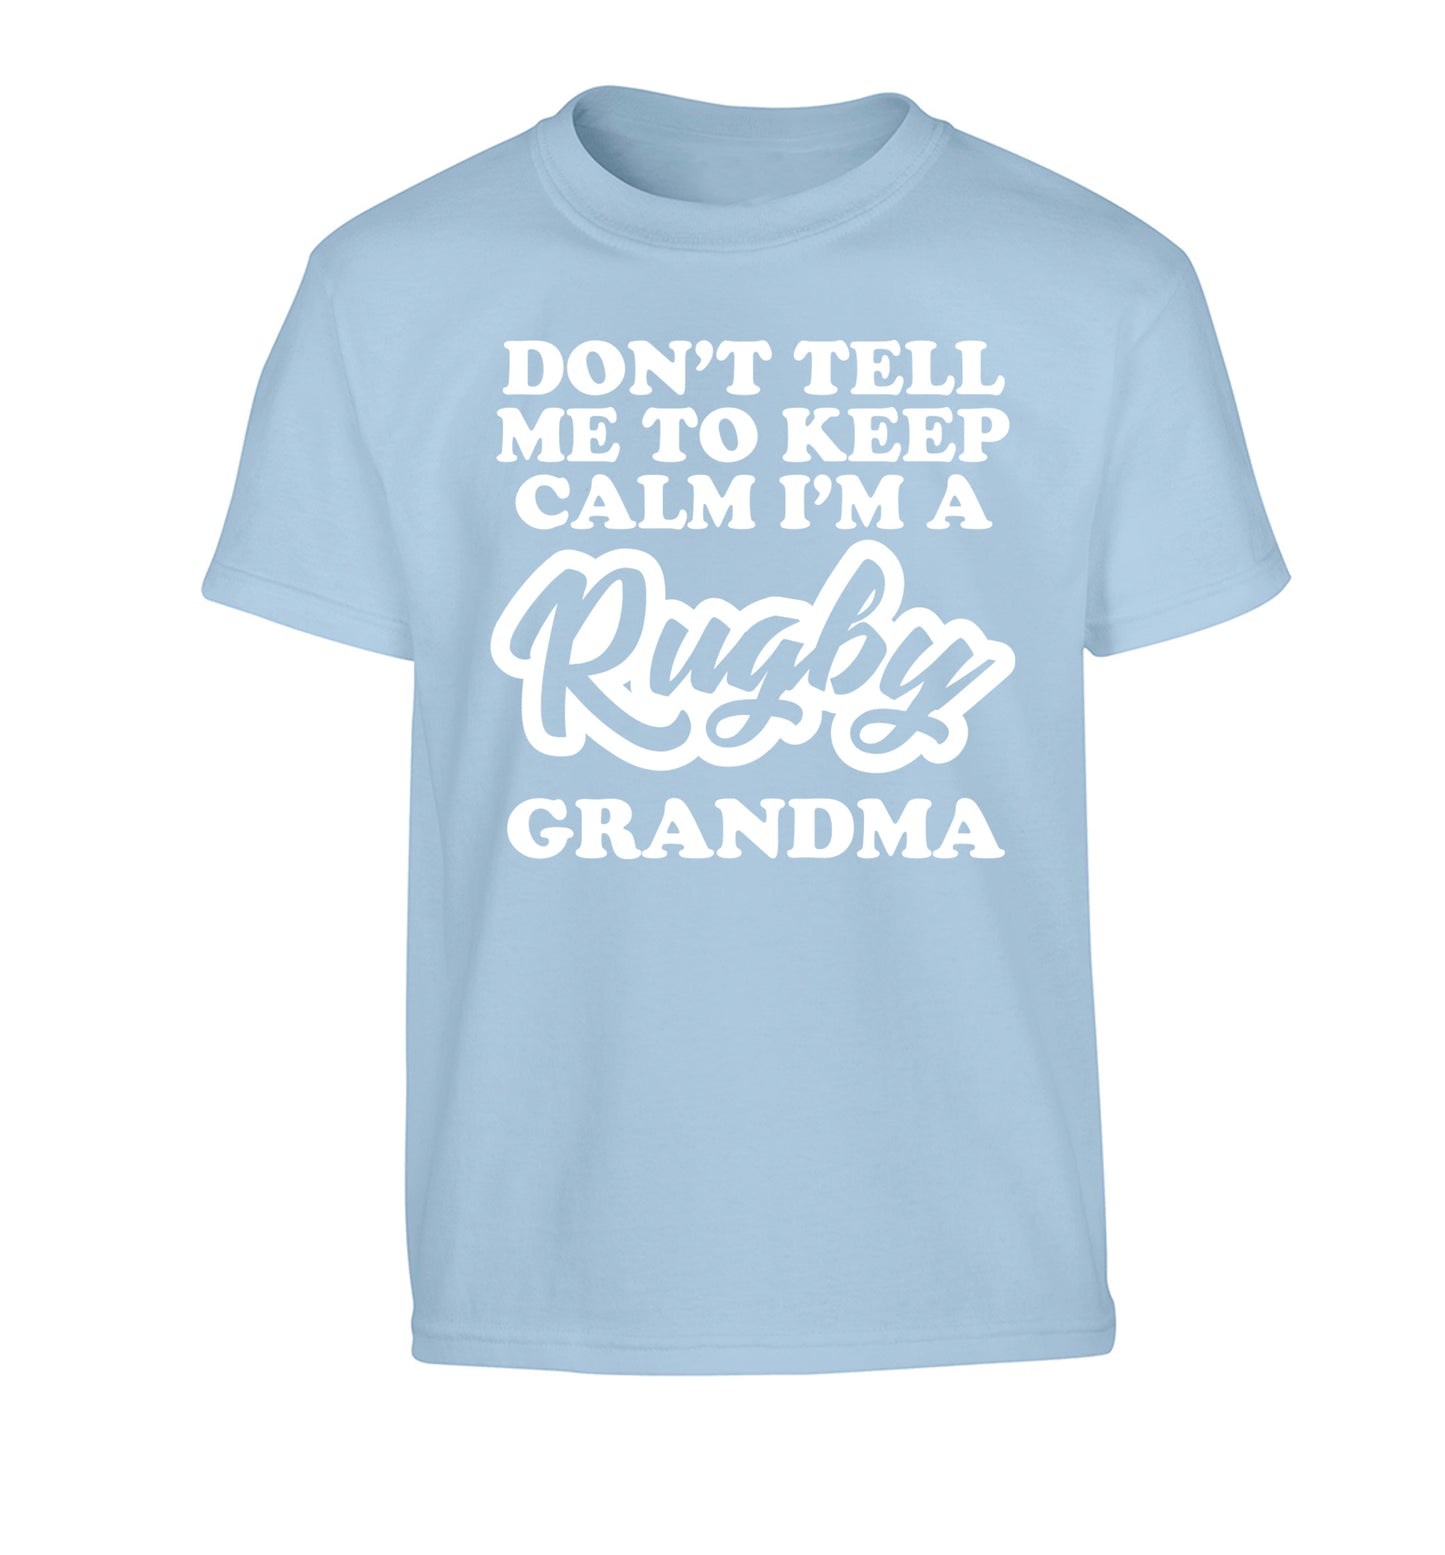 Don't tell me to keep calm I'm a rugby grandma Children's light blue Tshirt 12-13 Years